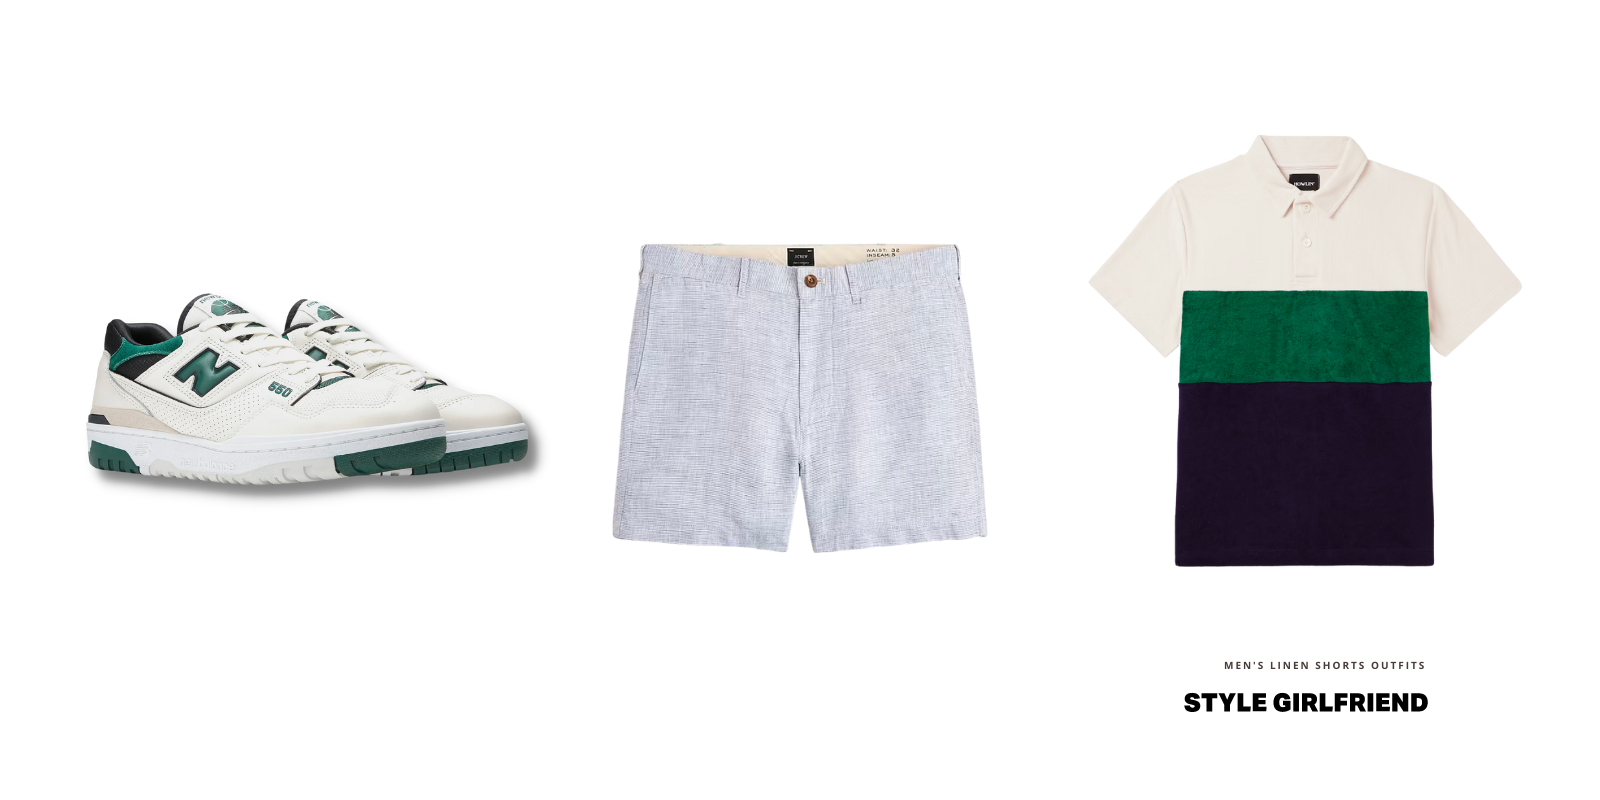 How to Wear Linen Shorts: 5 Outfits for Guys